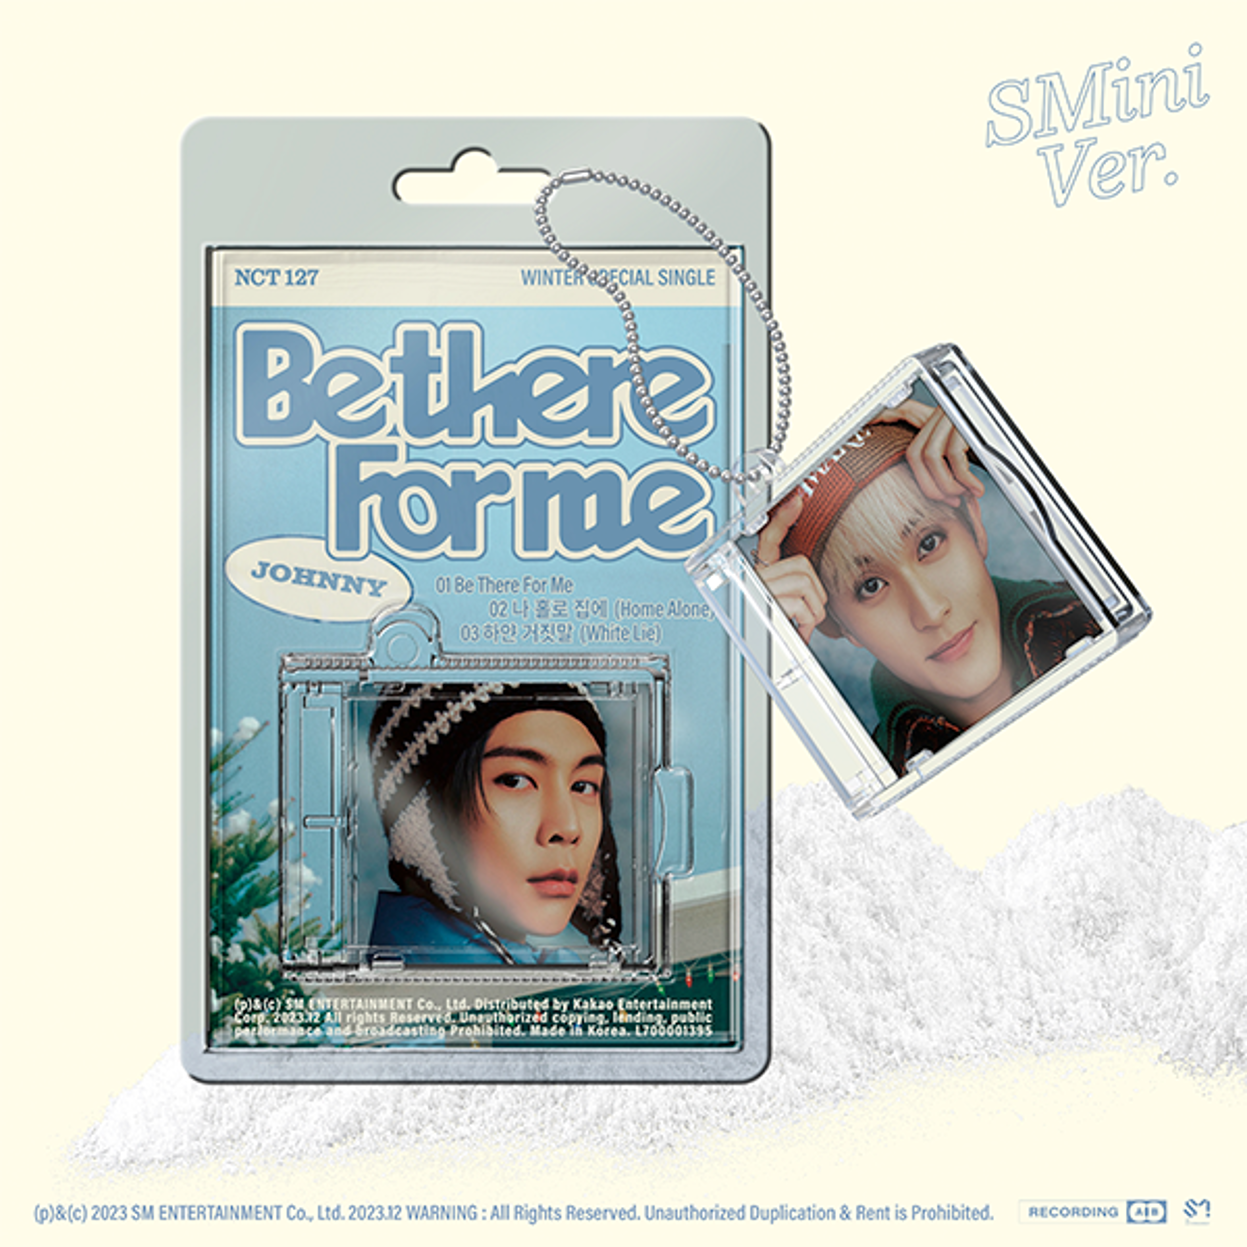 NCT 127 (NCT 127) - Winter Special Single Album [Be There For Me] (SMini Ver.) (Random Version)